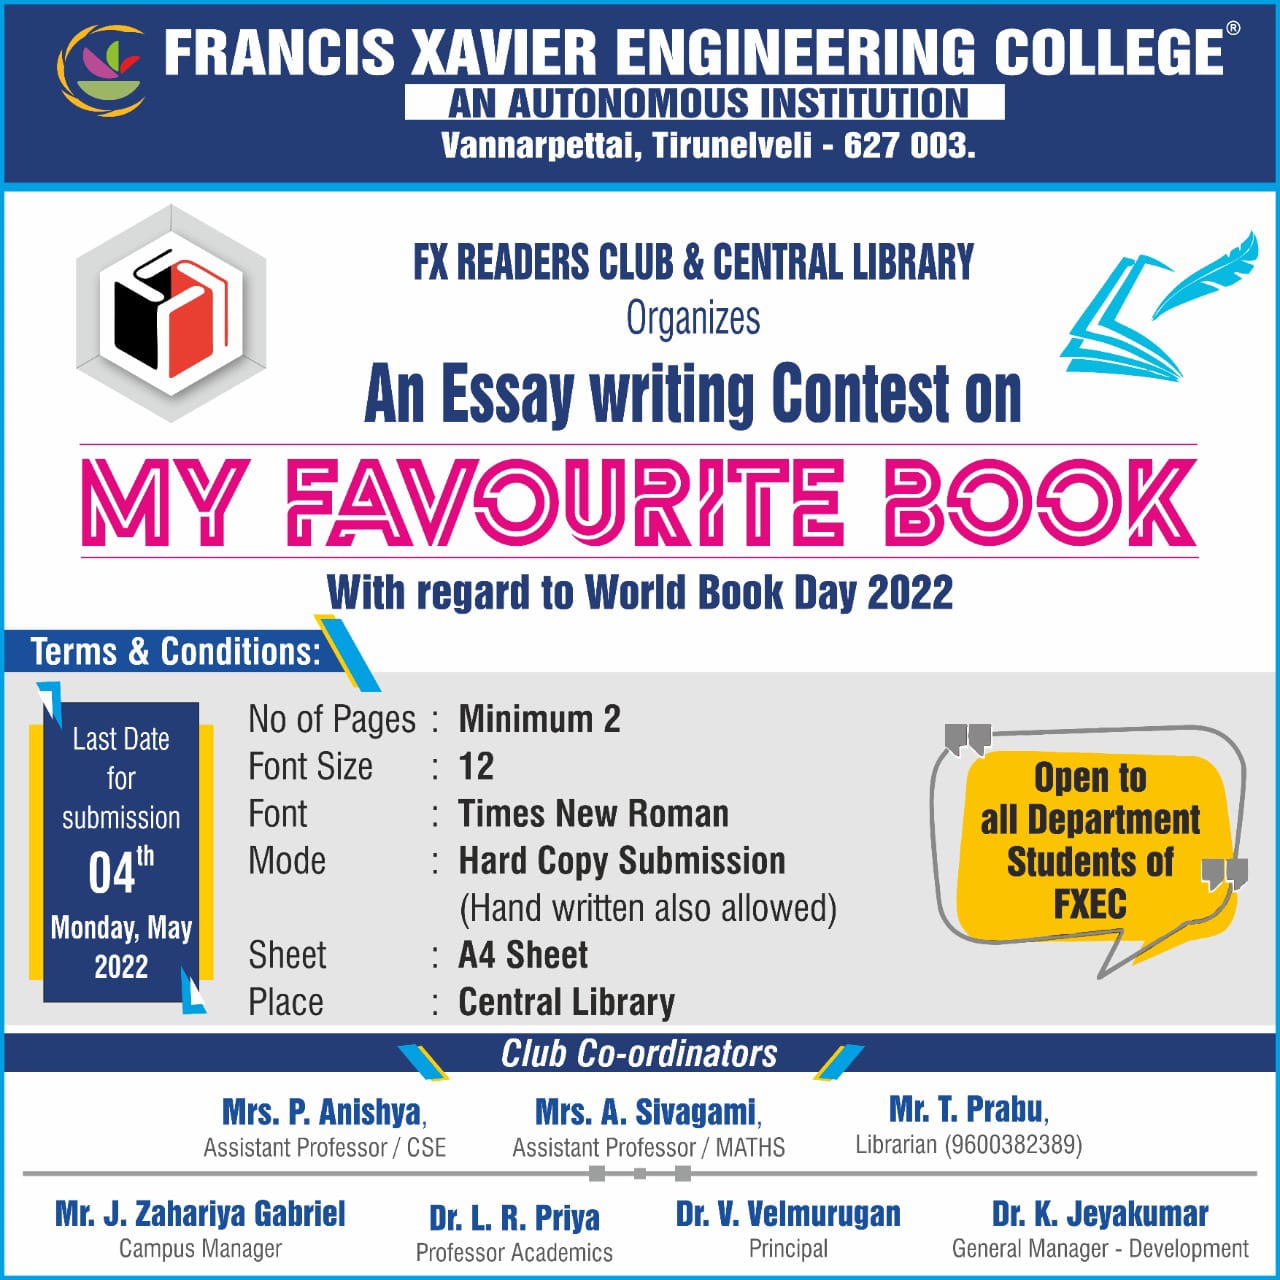 An Essay Writing Contest on My Favourite Book